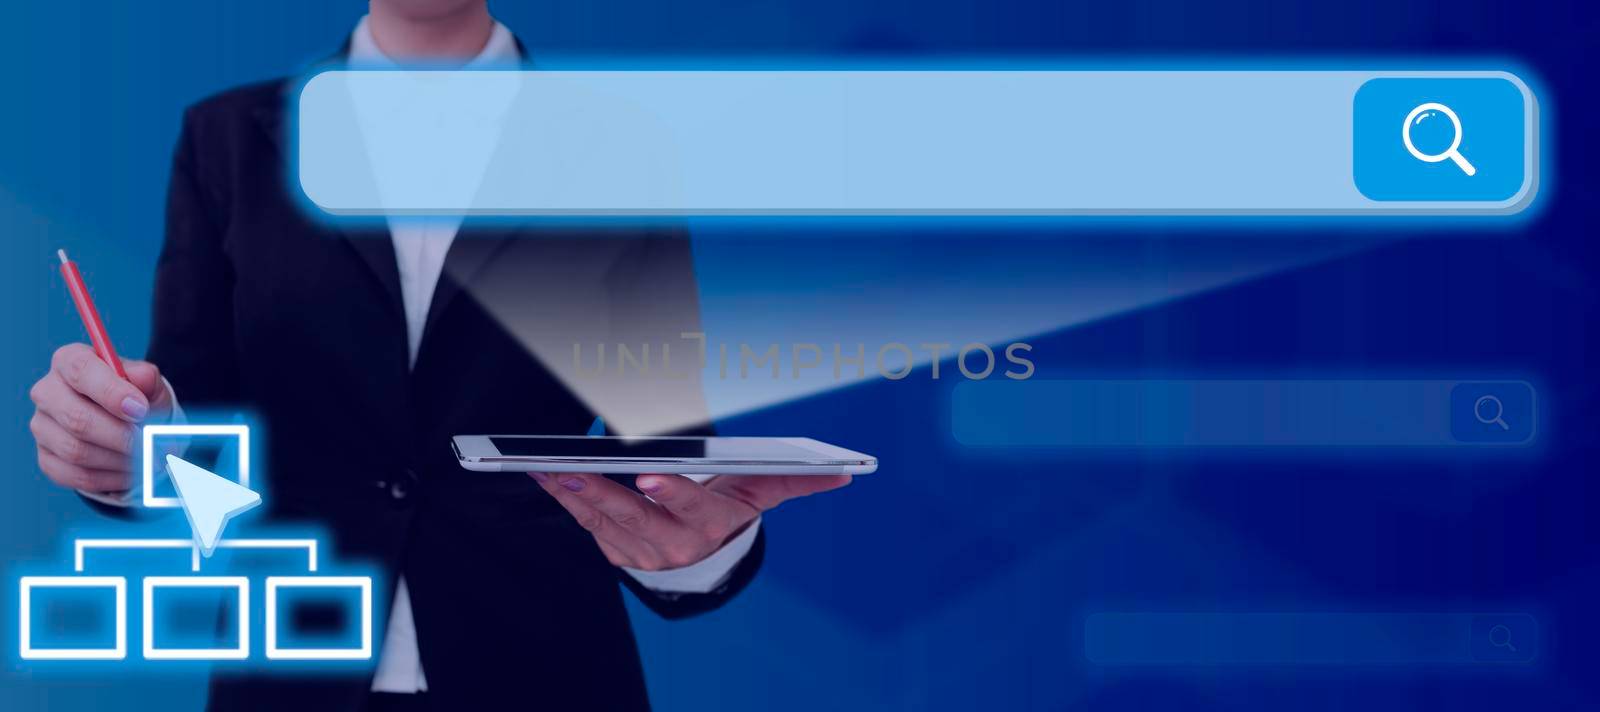 Businesswoman With A Tablet And Pen Pointing On Computer Network And Search Bar Displaying Digital Connection. Woman Holding A Cellphone Checking Wireless Connectivity. by nialowwa